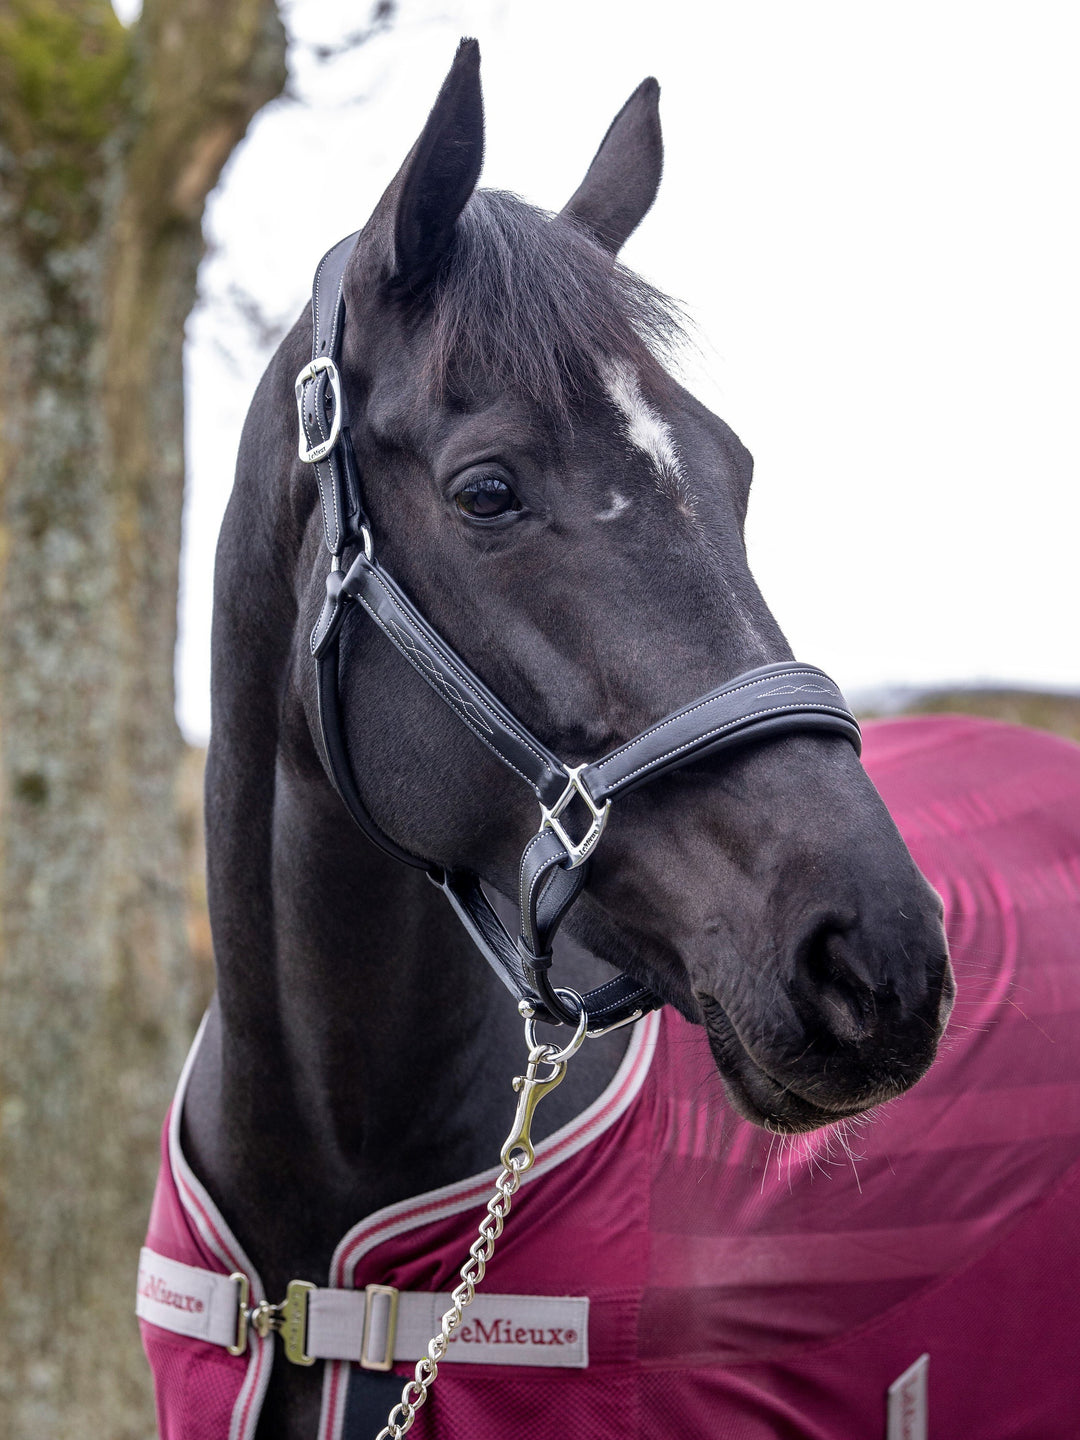 The LeMieux Stitched Leather Headcollar in Black#Black